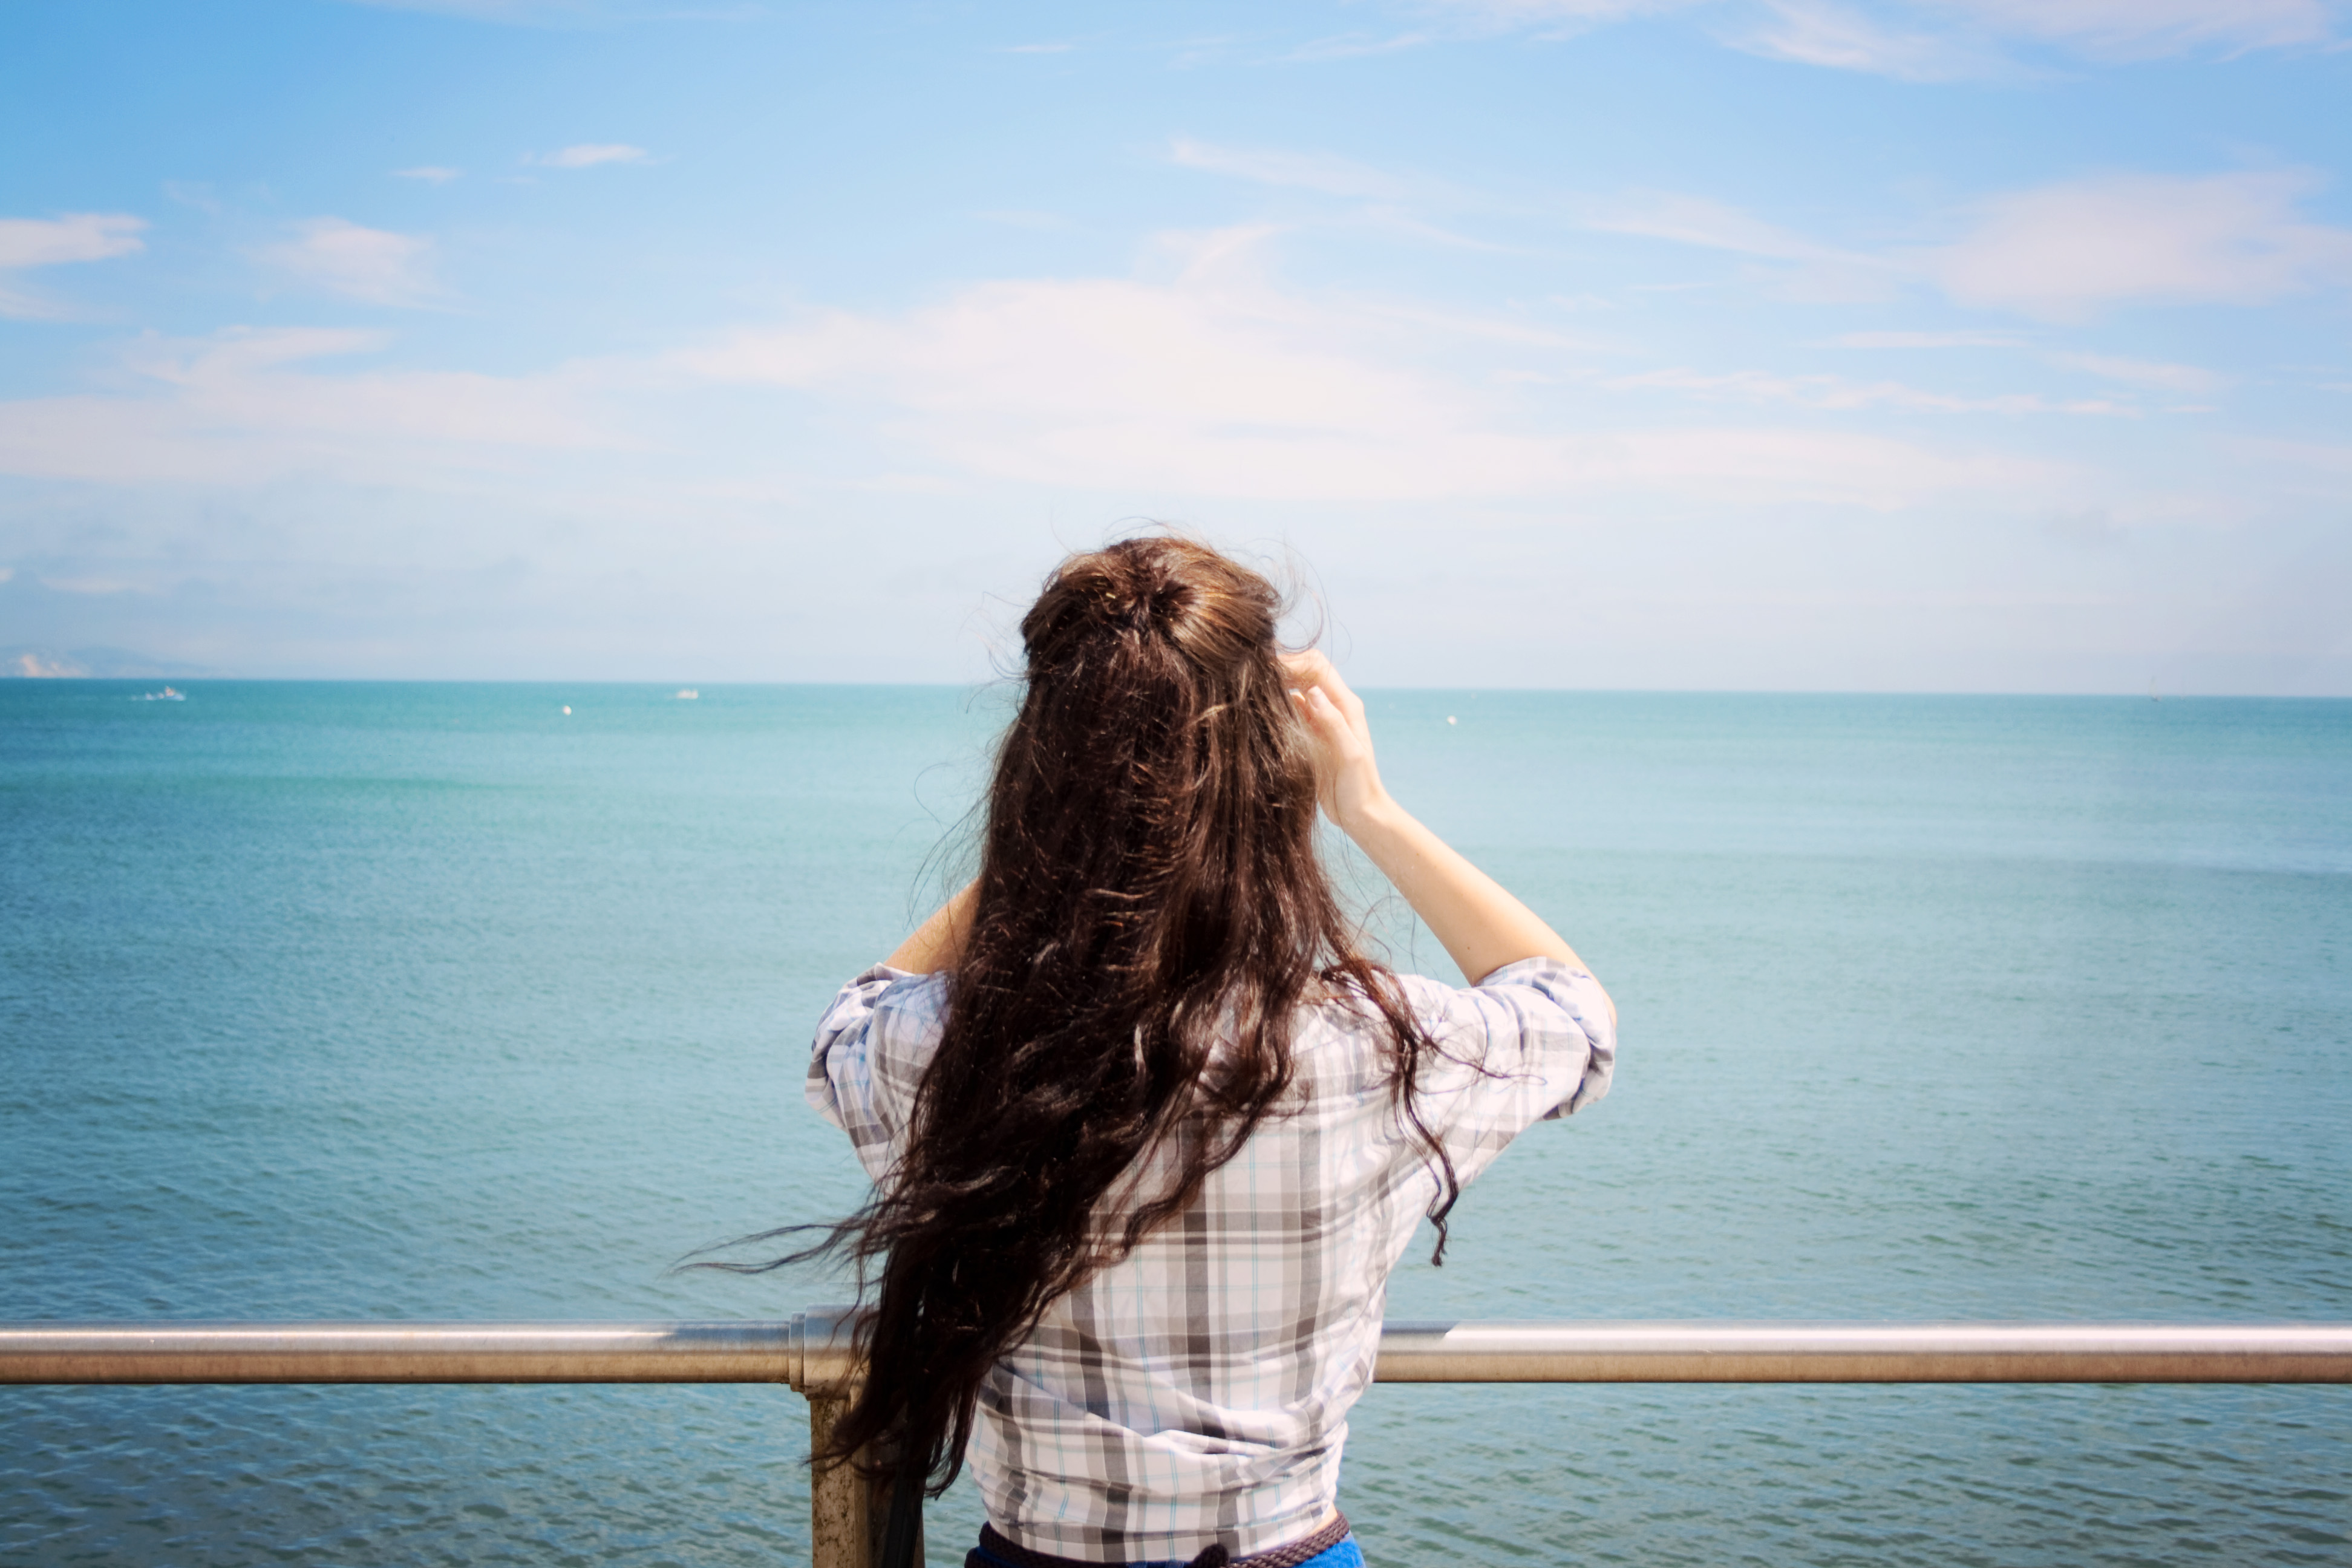 Teen girl with long brunette hair looking out to sea. Blue water and steel railings.